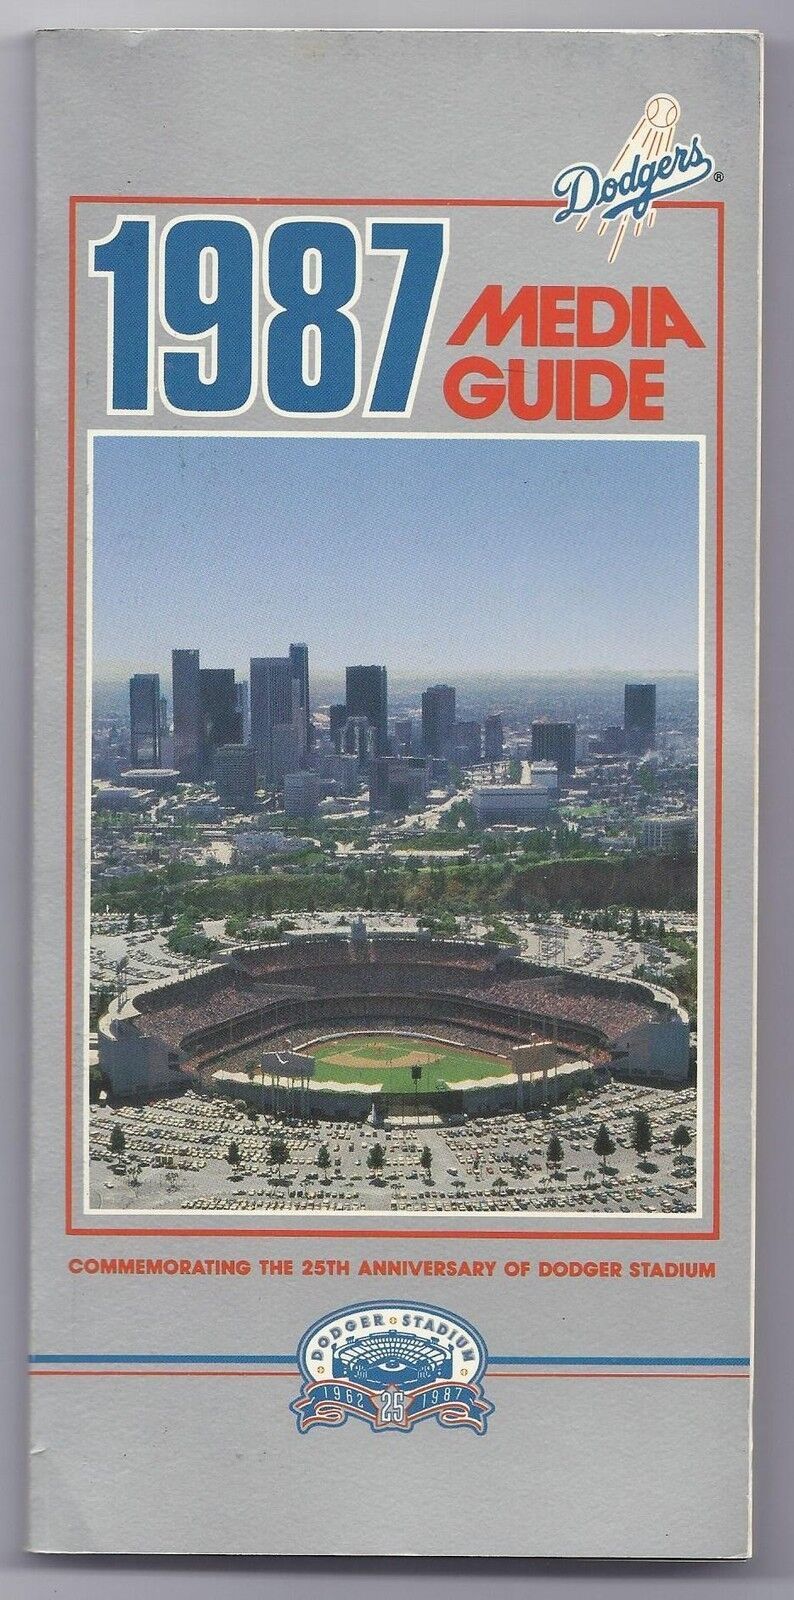 Primary image for 1987 Los Angeles Dodgers Media Guide